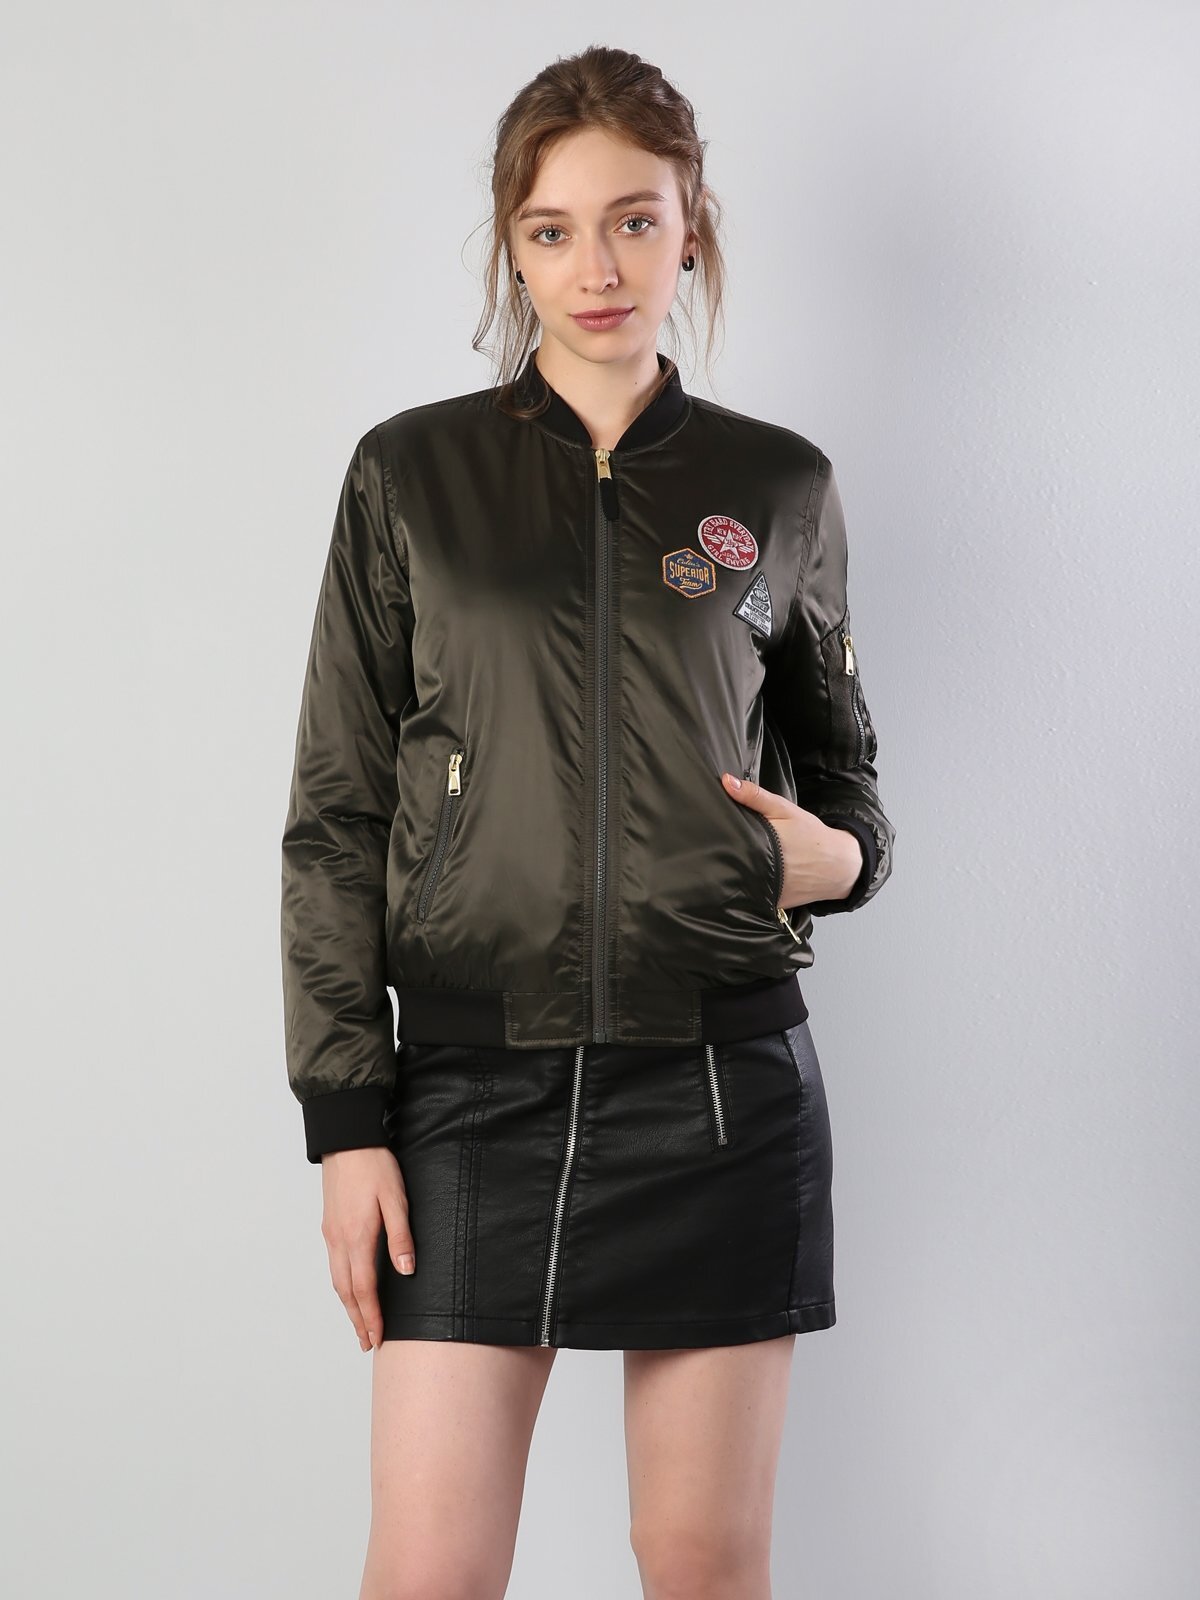 Colins Green Woman Jackets. 4